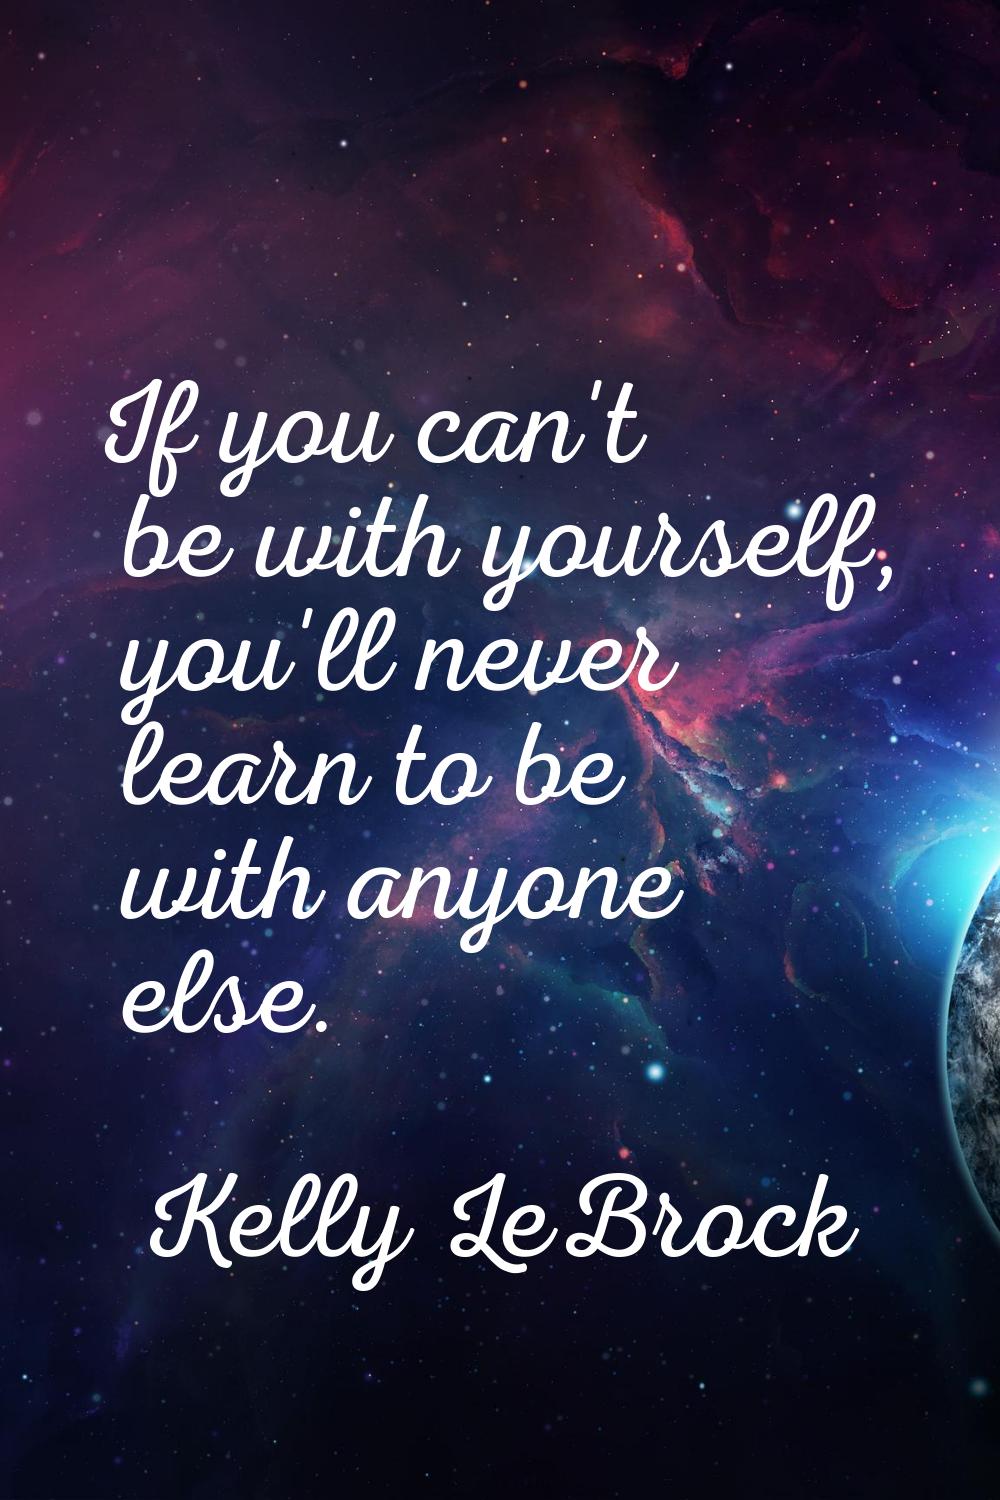 If you can't be with yourself, you'll never learn to be with anyone else.